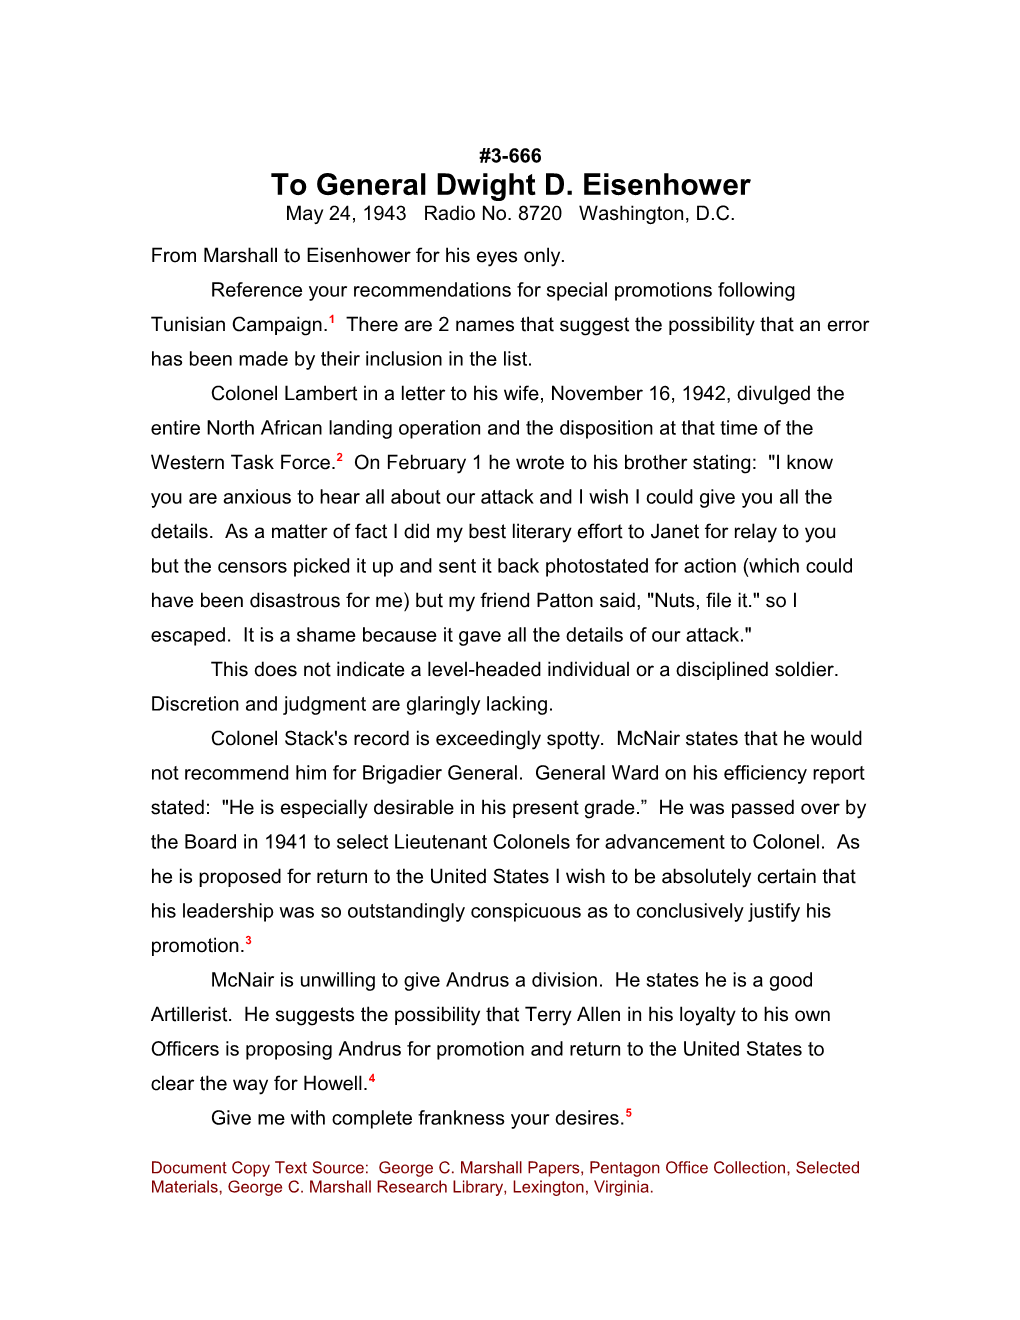 To General Dwight D. Eisenhower s2